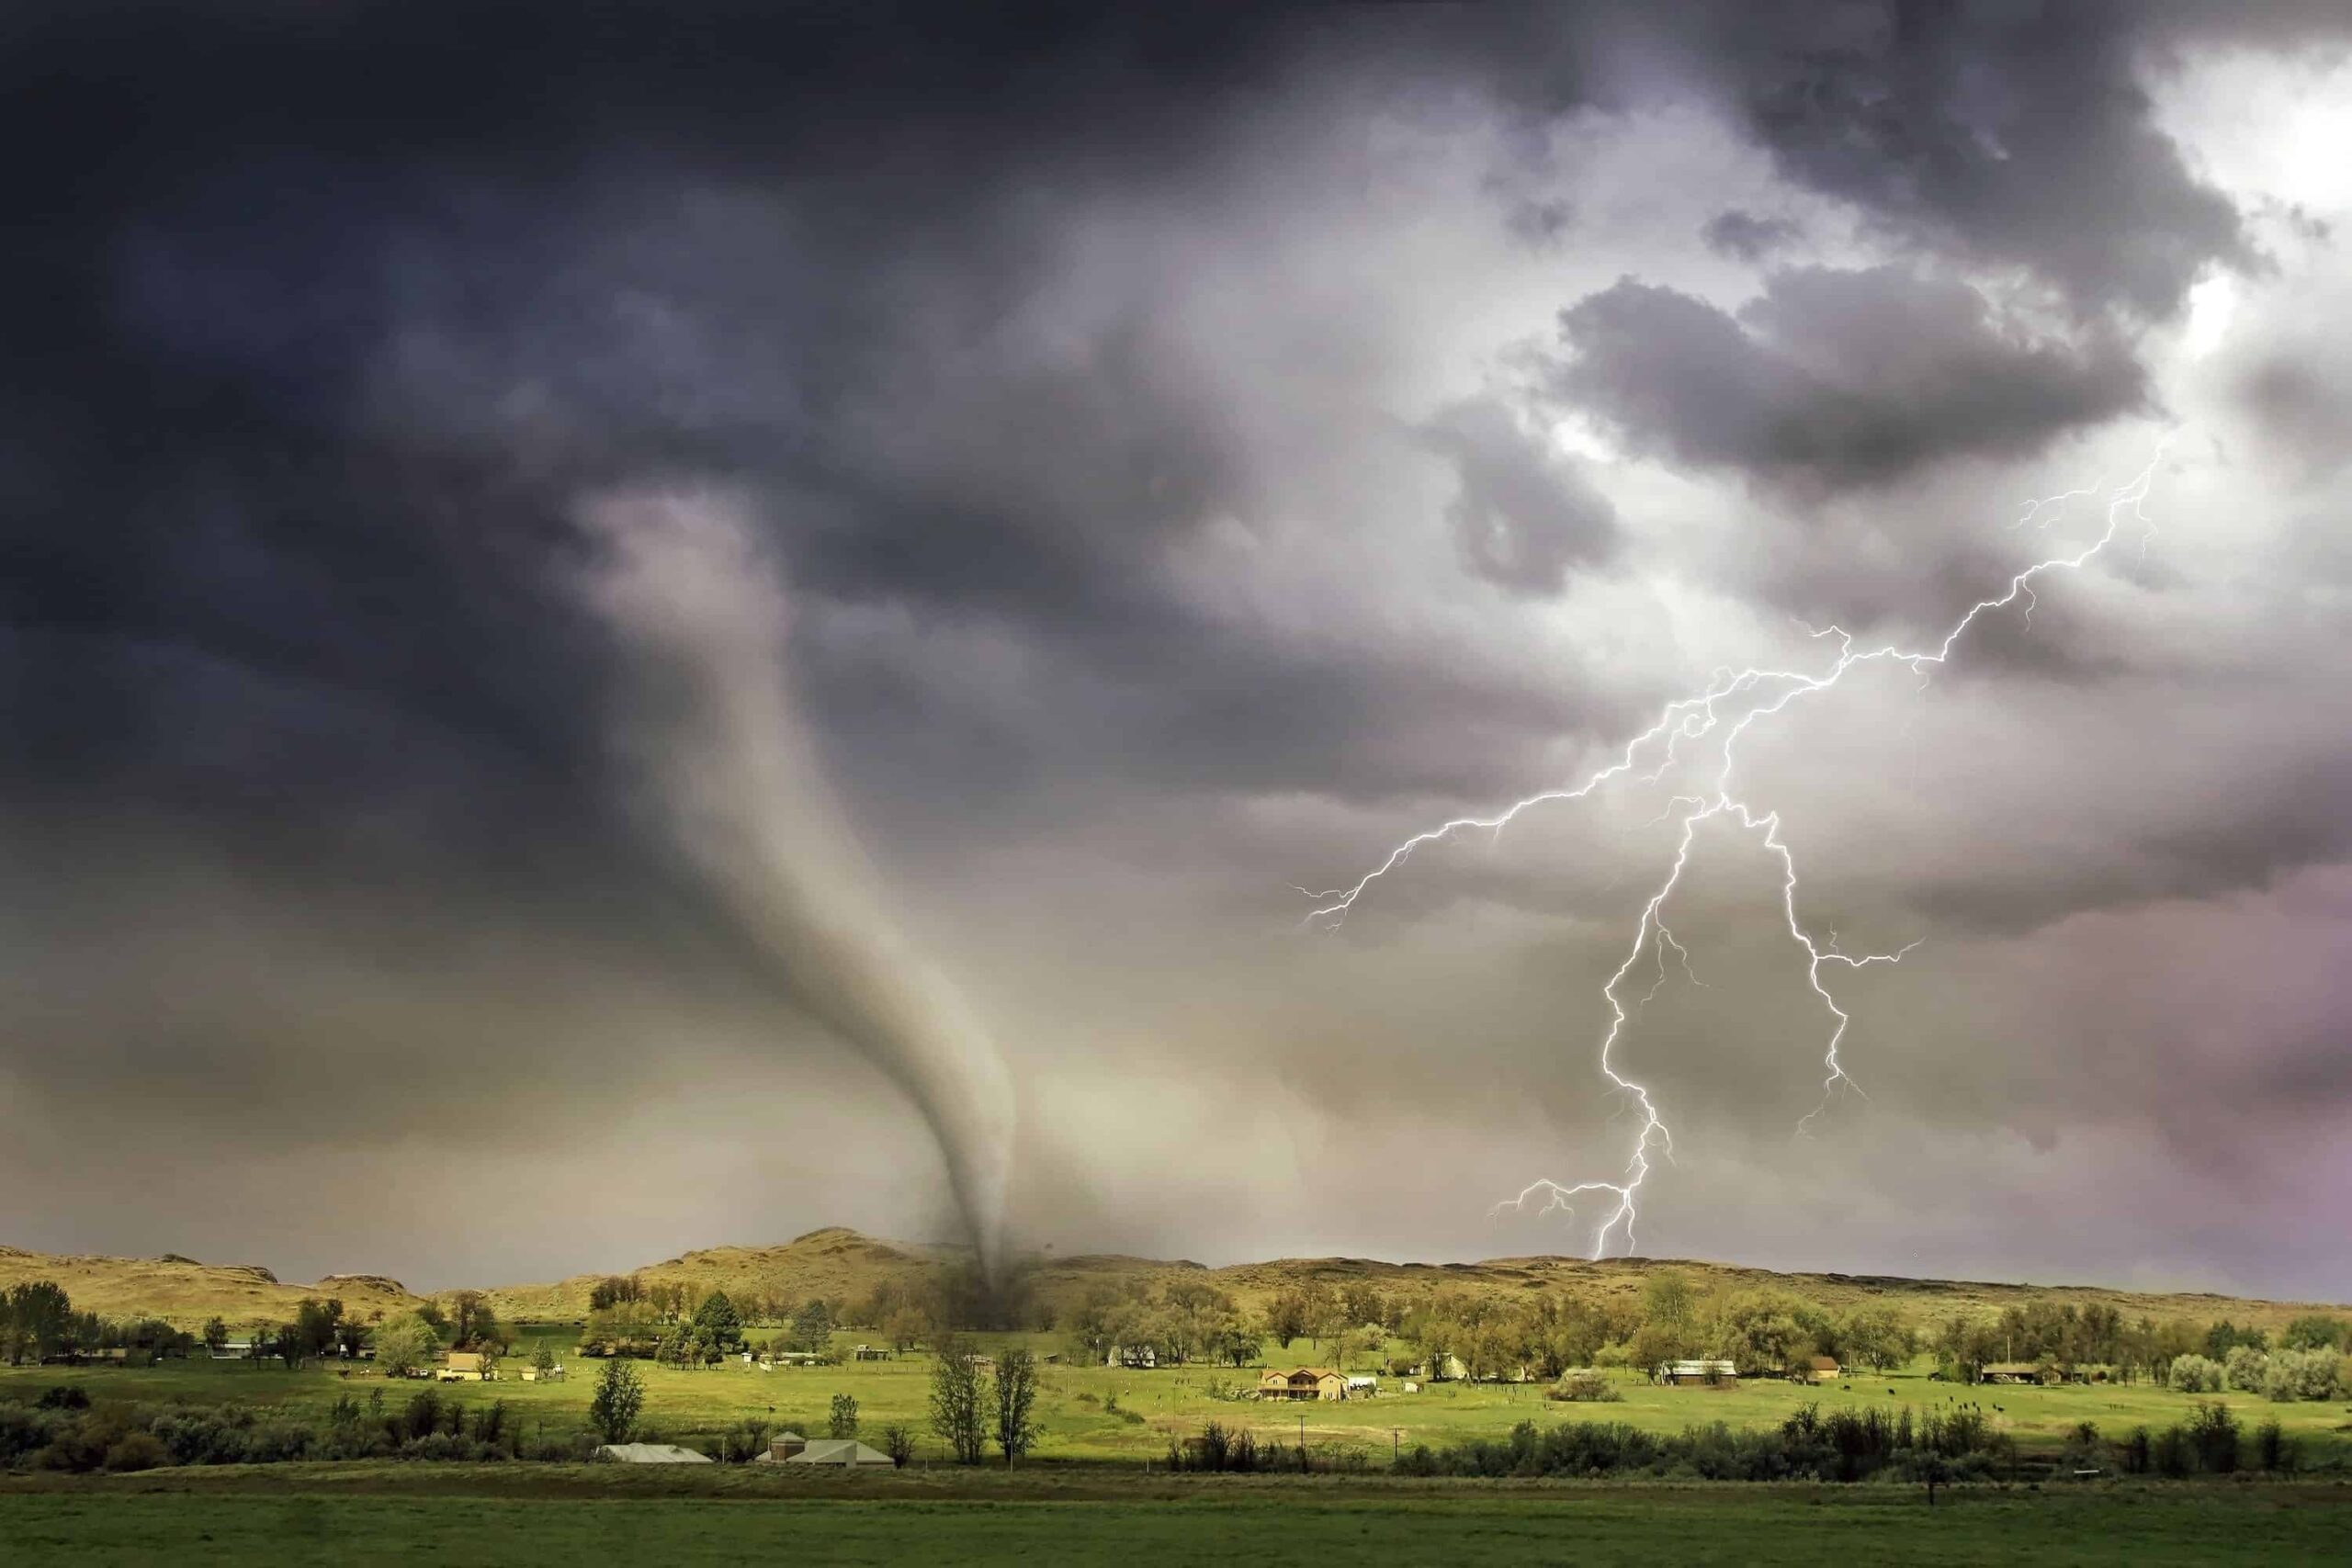 How Do Tornadoes Affect Humans and the Environment?